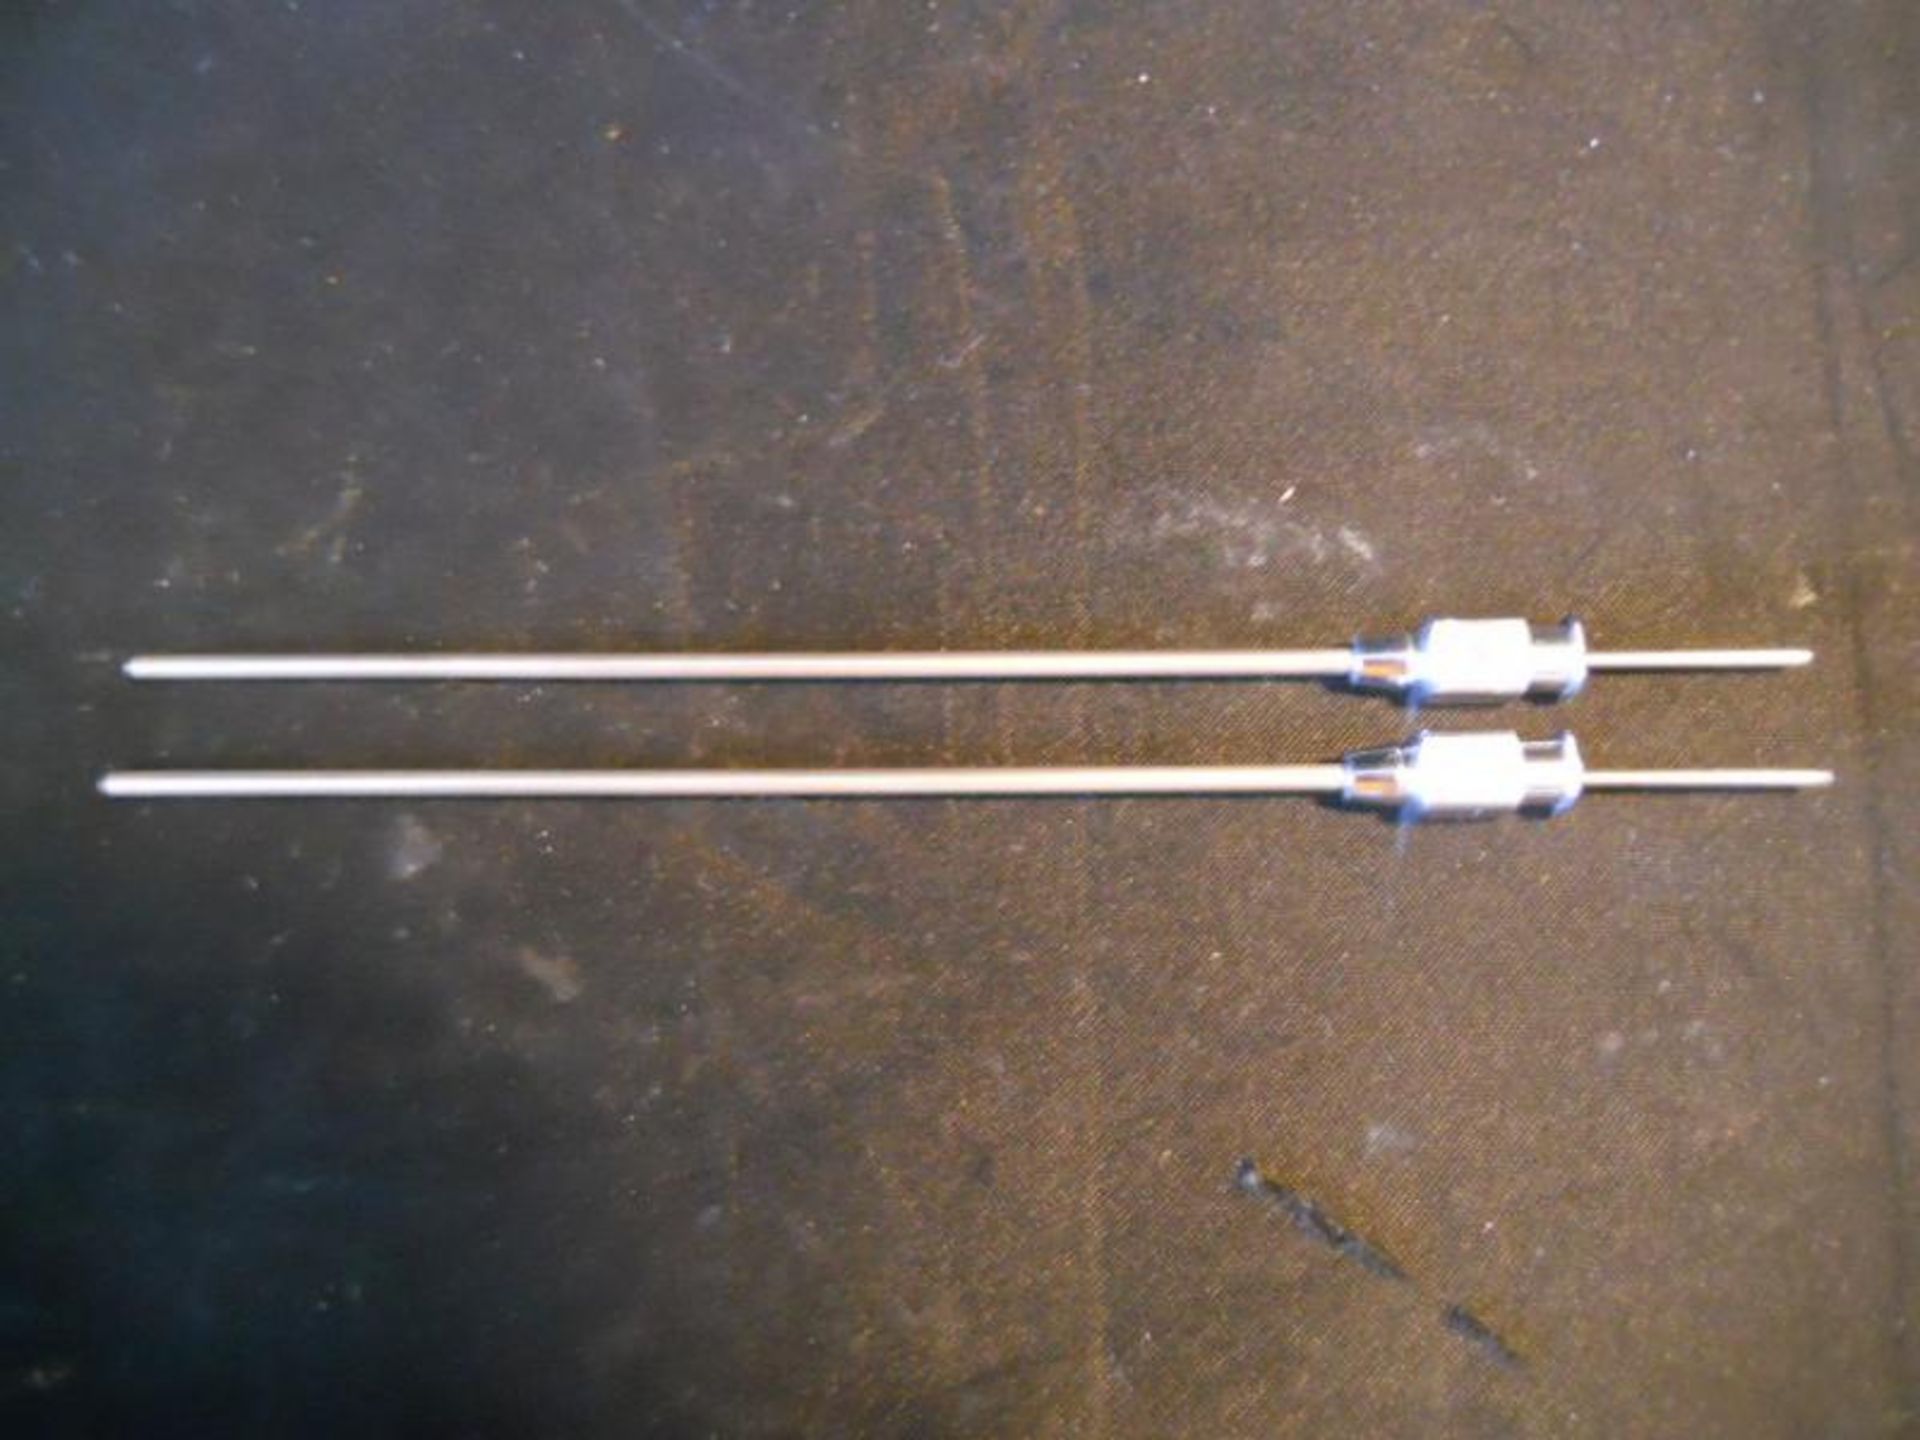 Lot of 2 Becton Dickinson B-D BD 14 Gauge 4" Laboratory Cannula 1789 1250NR, Qty 1, 331030762779 - Image 4 of 5